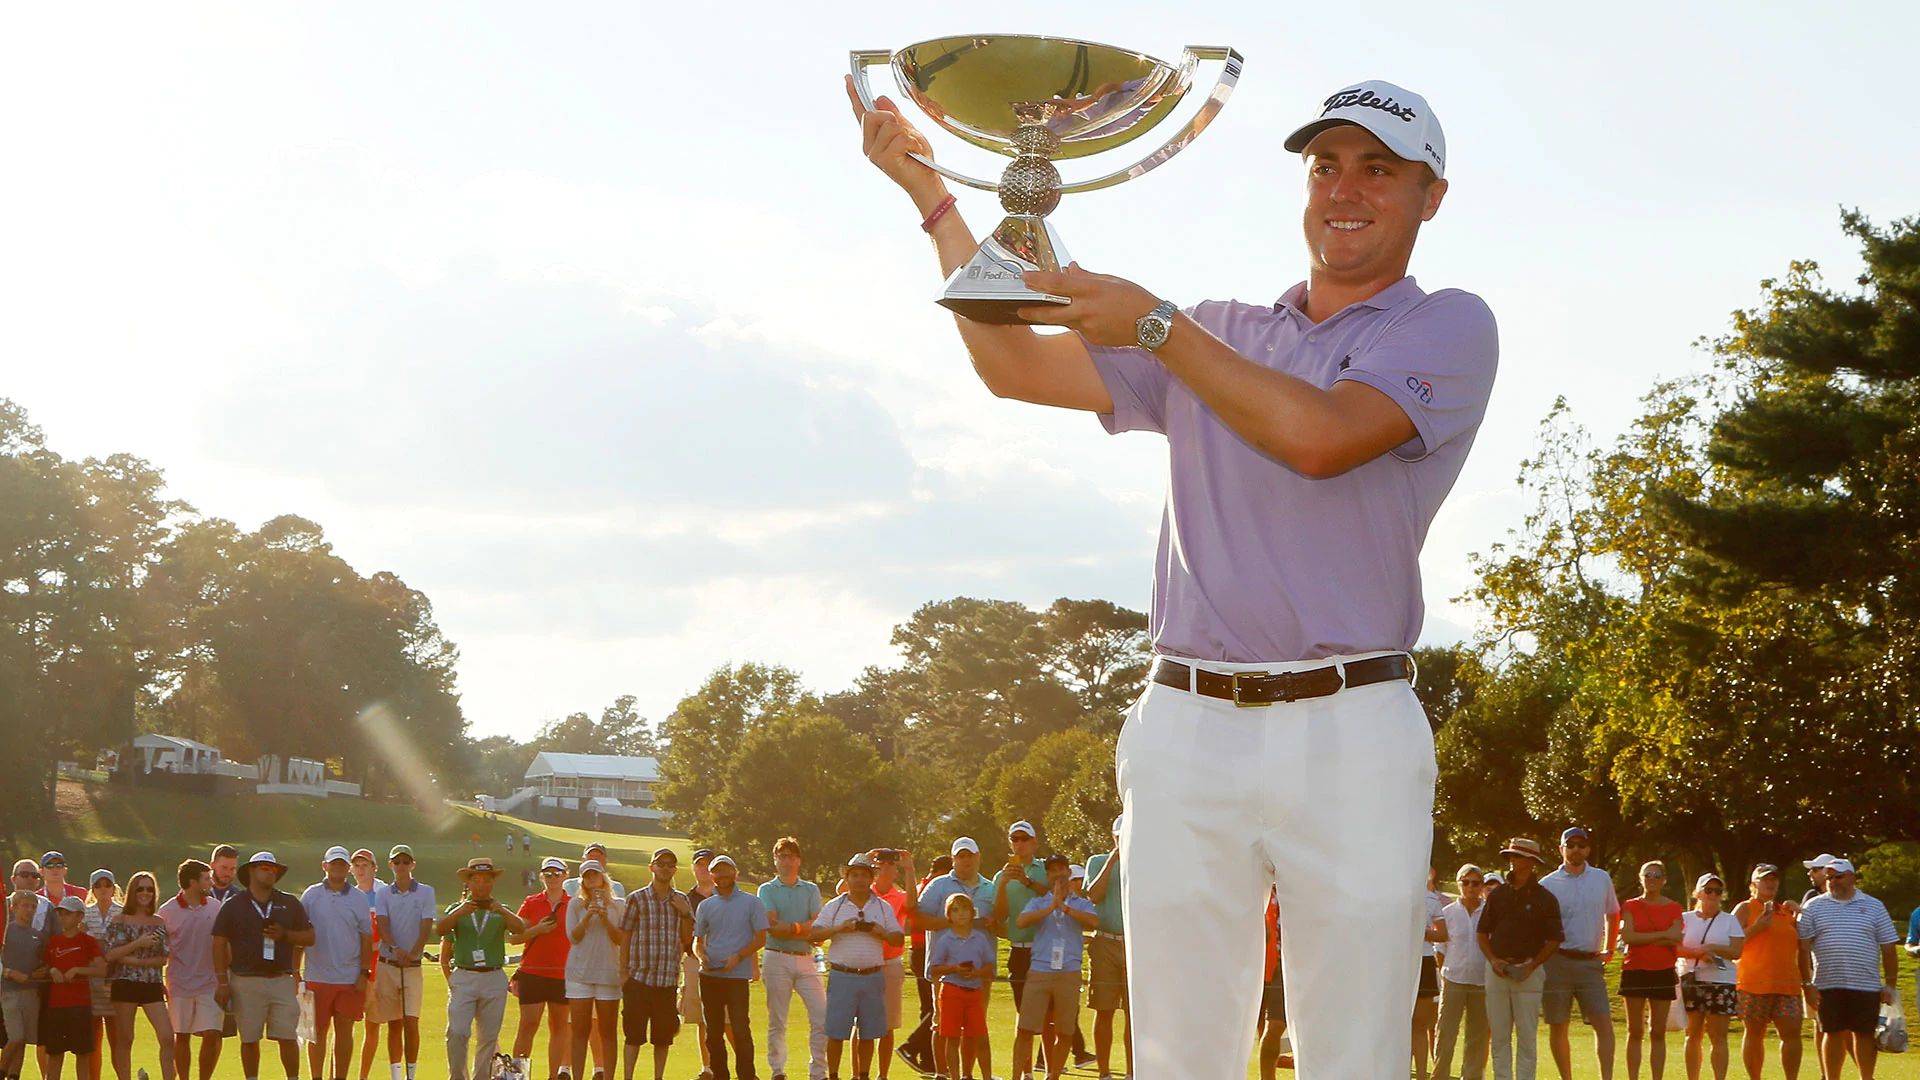 Only one trophy being handed out at next year's Tour Champ.